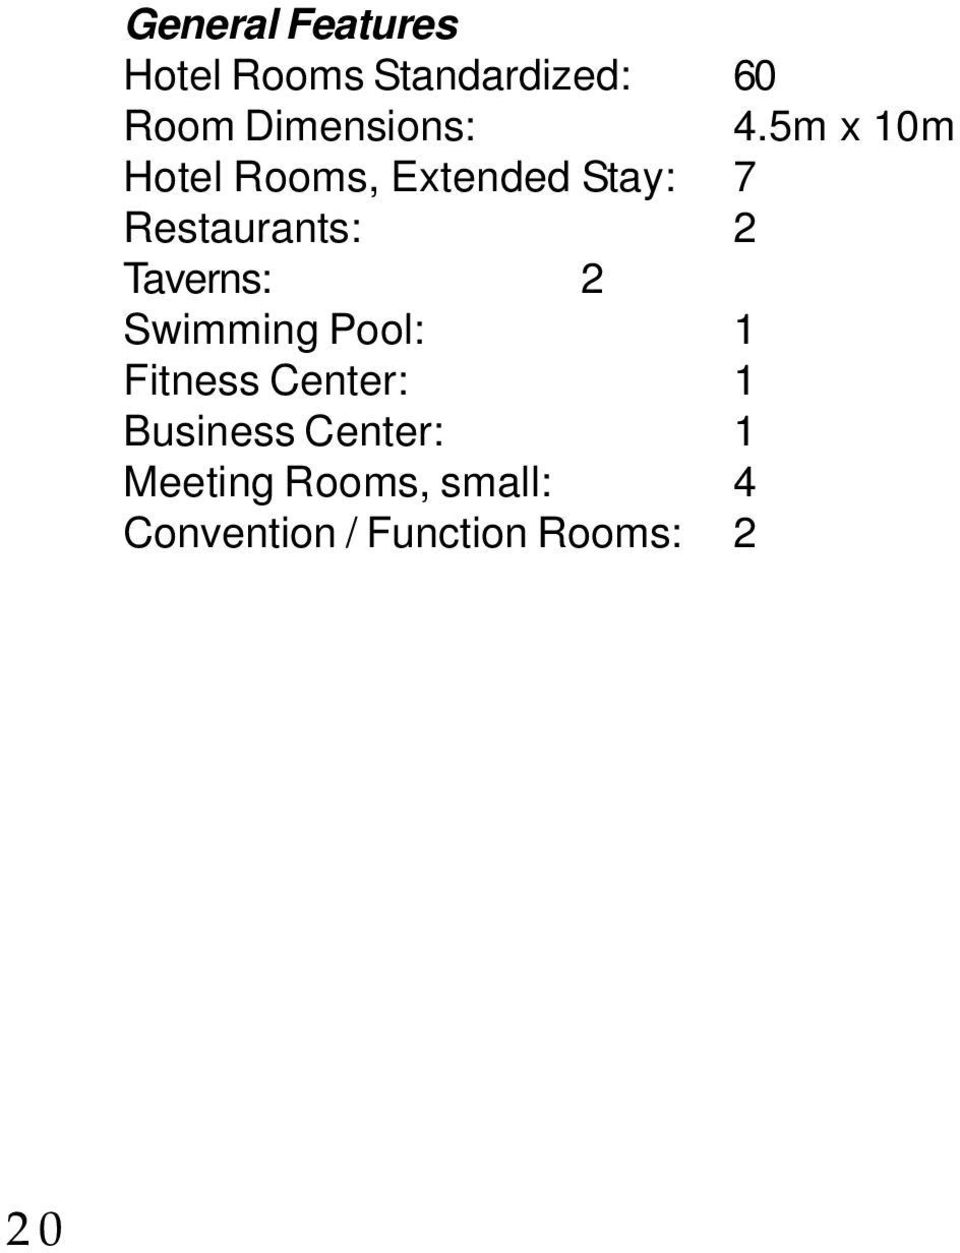 5m x 10m Hotel Rooms, Extended Stay: 7 Restaurants: 2